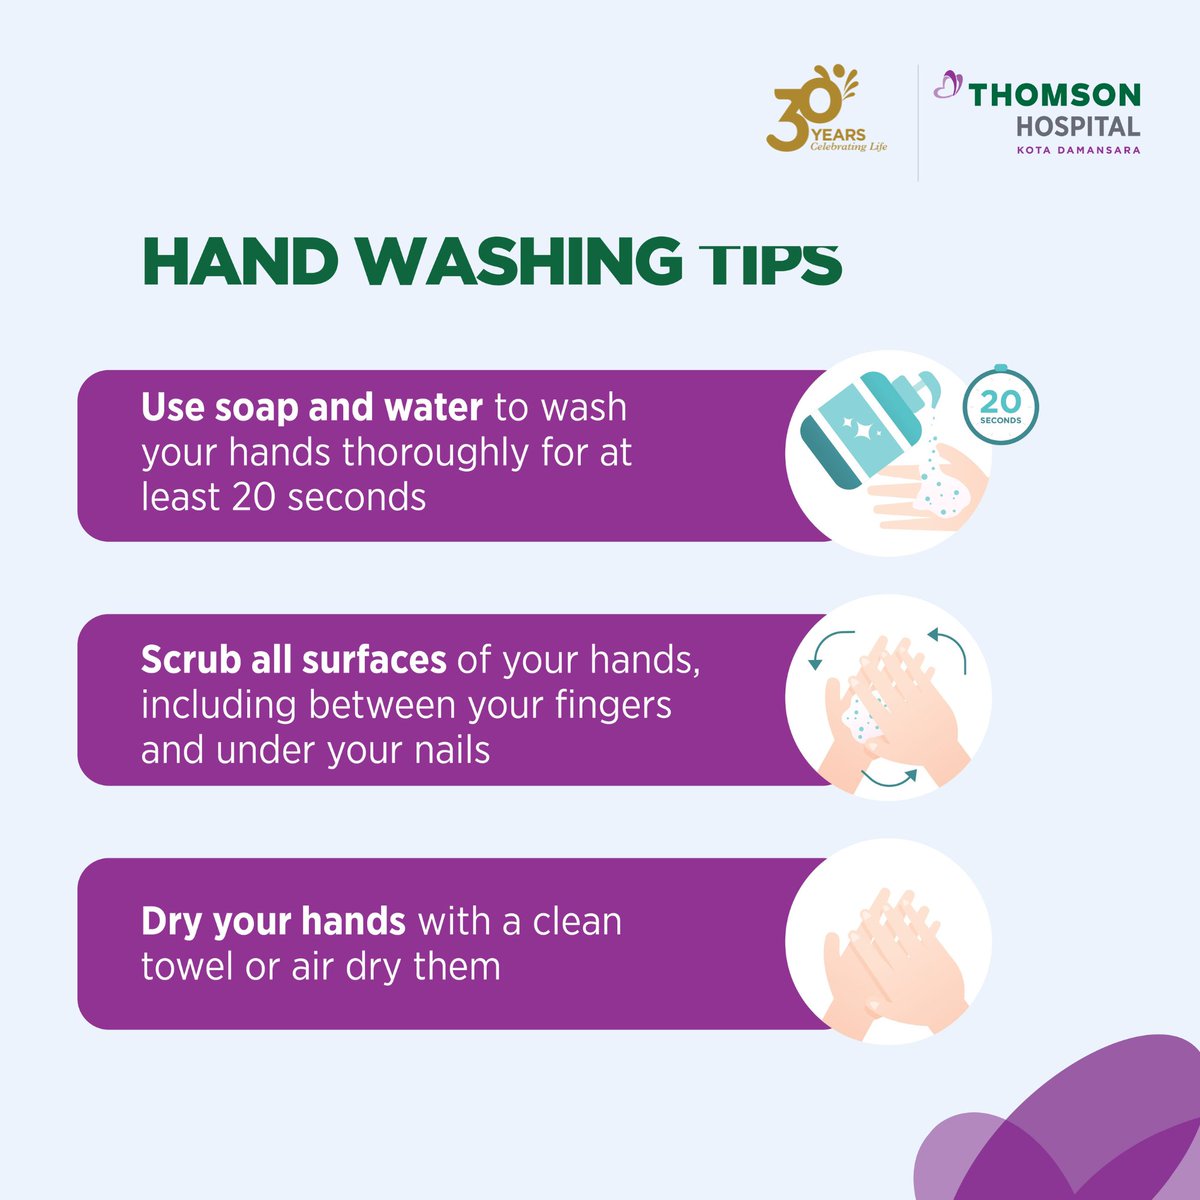 🌟 It's #HandHygiene Day! 🌟
Did you know that washing your hands regularly is crucial for preventing the spread of germs and illnesses? 🤲✨ Let's raise awareness about the importance of handwashing today!
#ThomsonHospital #CelebratingLife